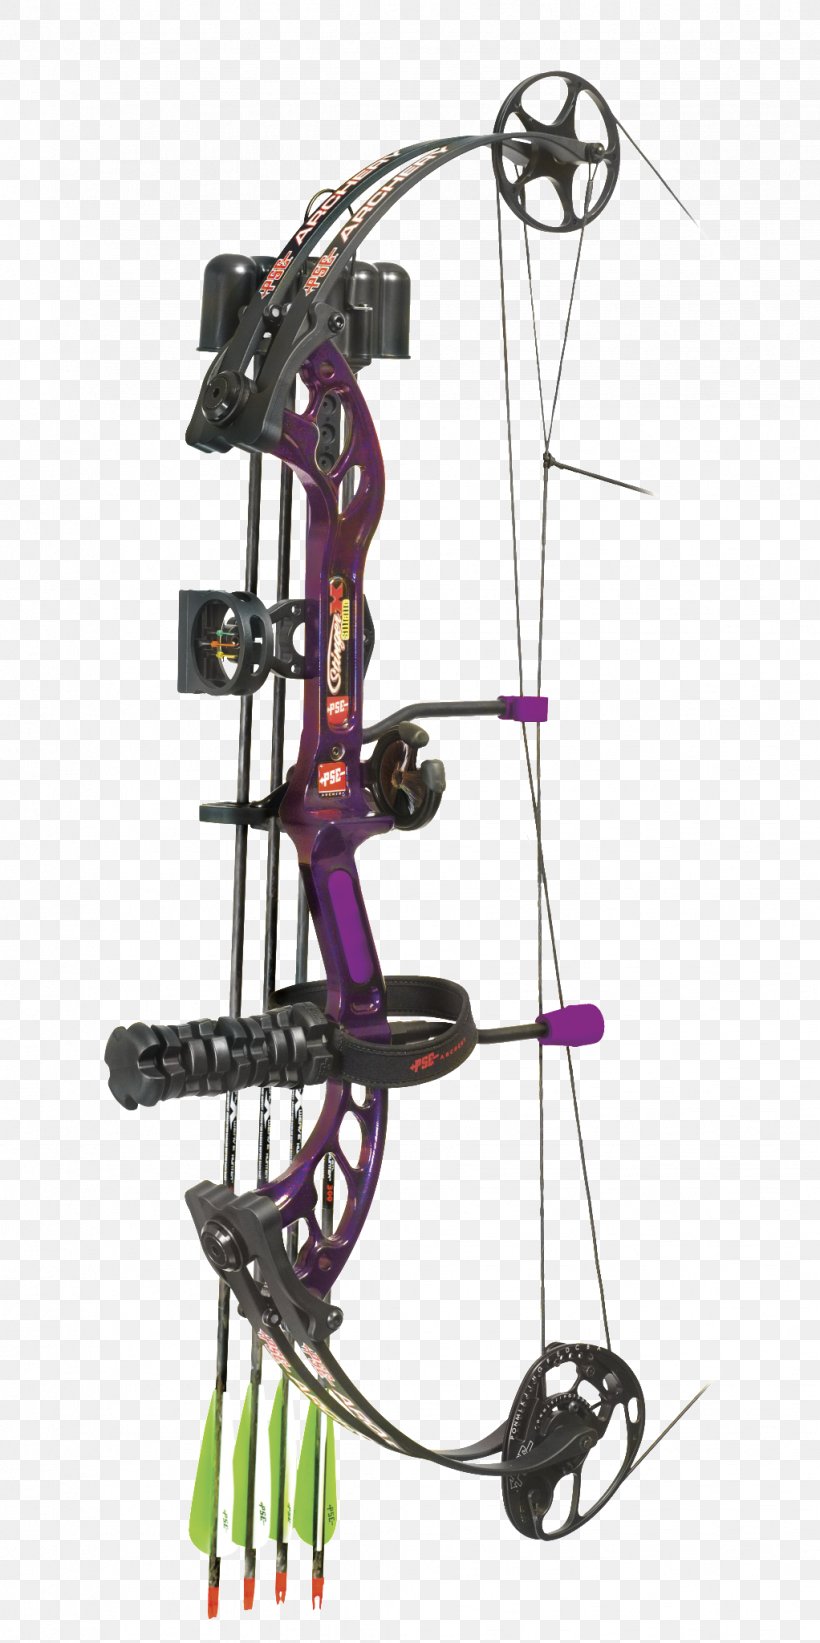 Compound Bows PSE Archery Bow And Arrow Hunting, PNG, 1022x2048px, Compound Bows, Archery, Bear Archery, Bow, Bow And Arrow Download Free